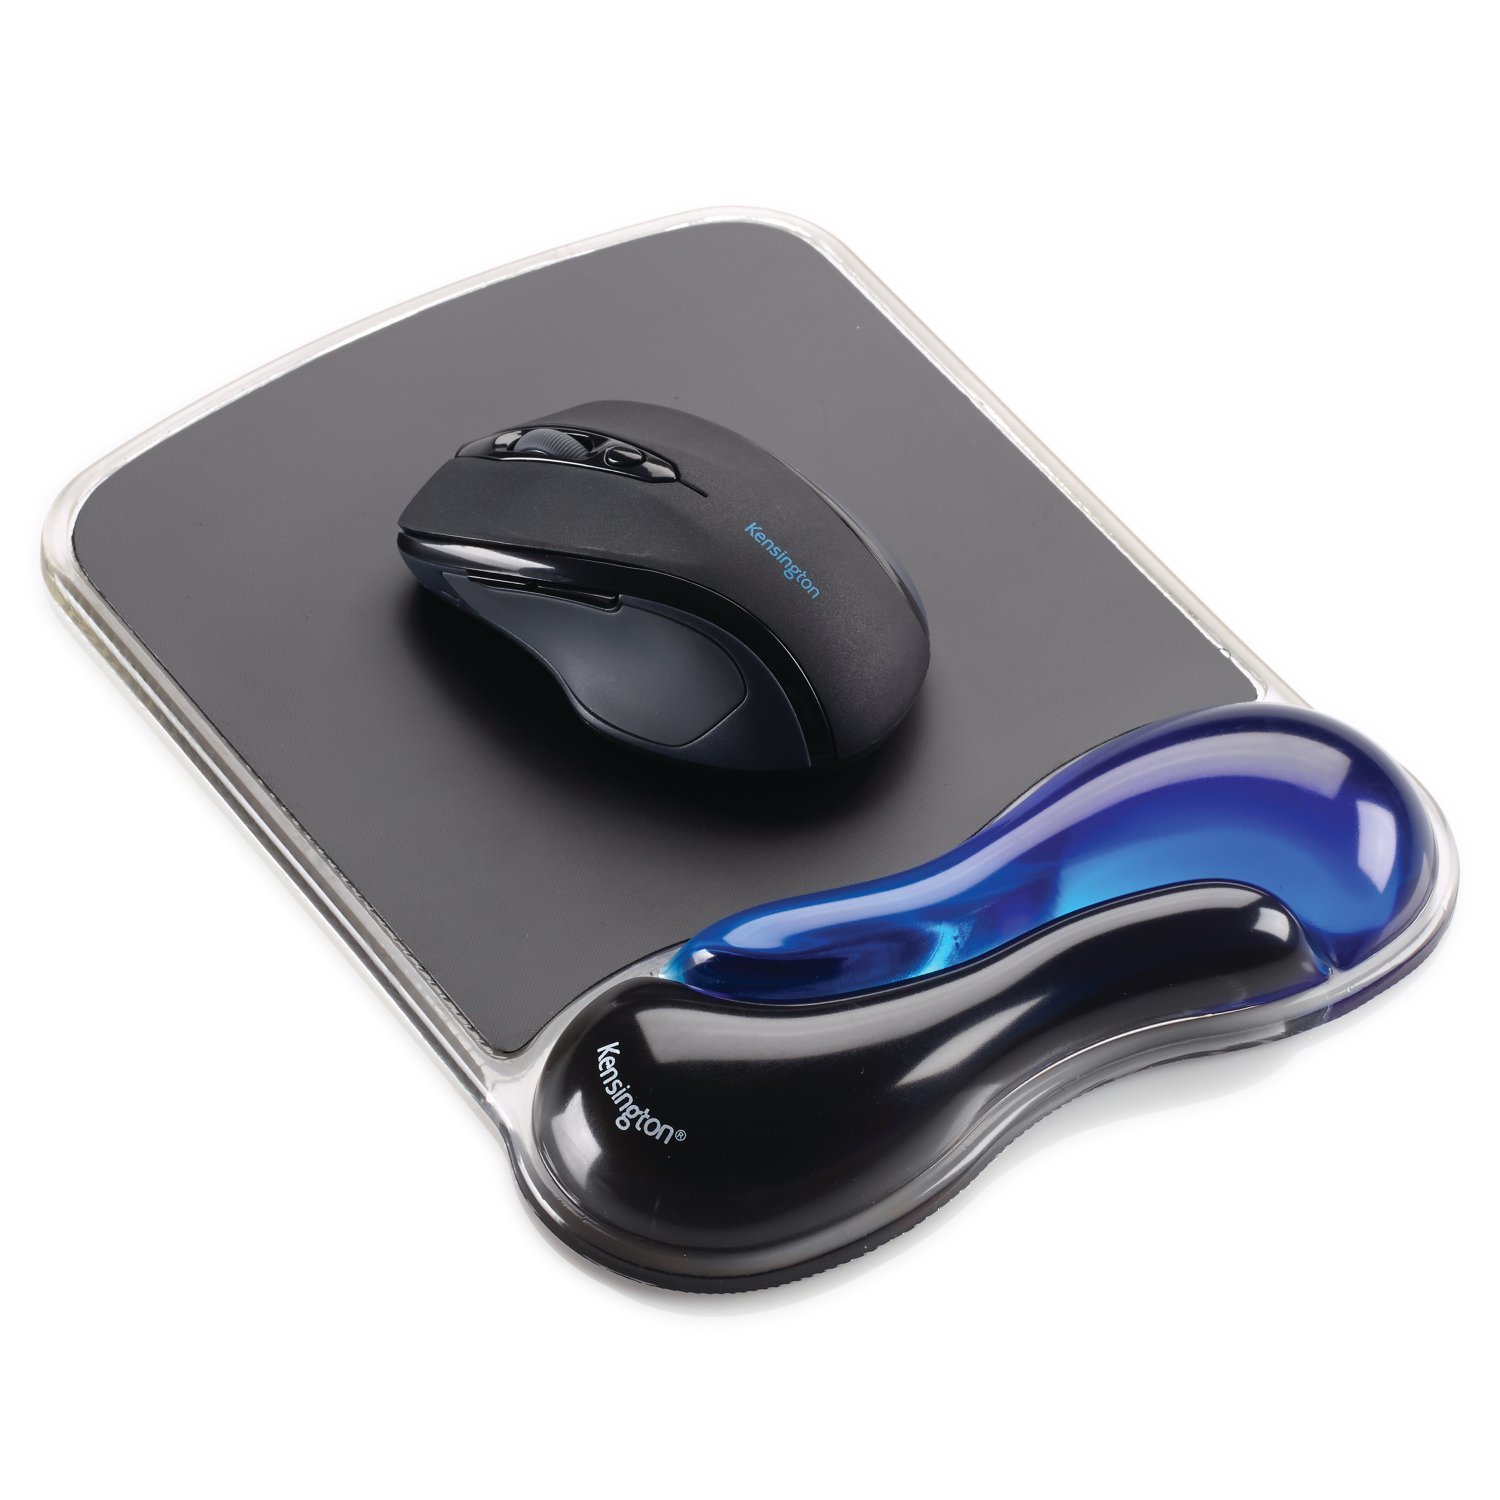 Mouse Pad duo gel